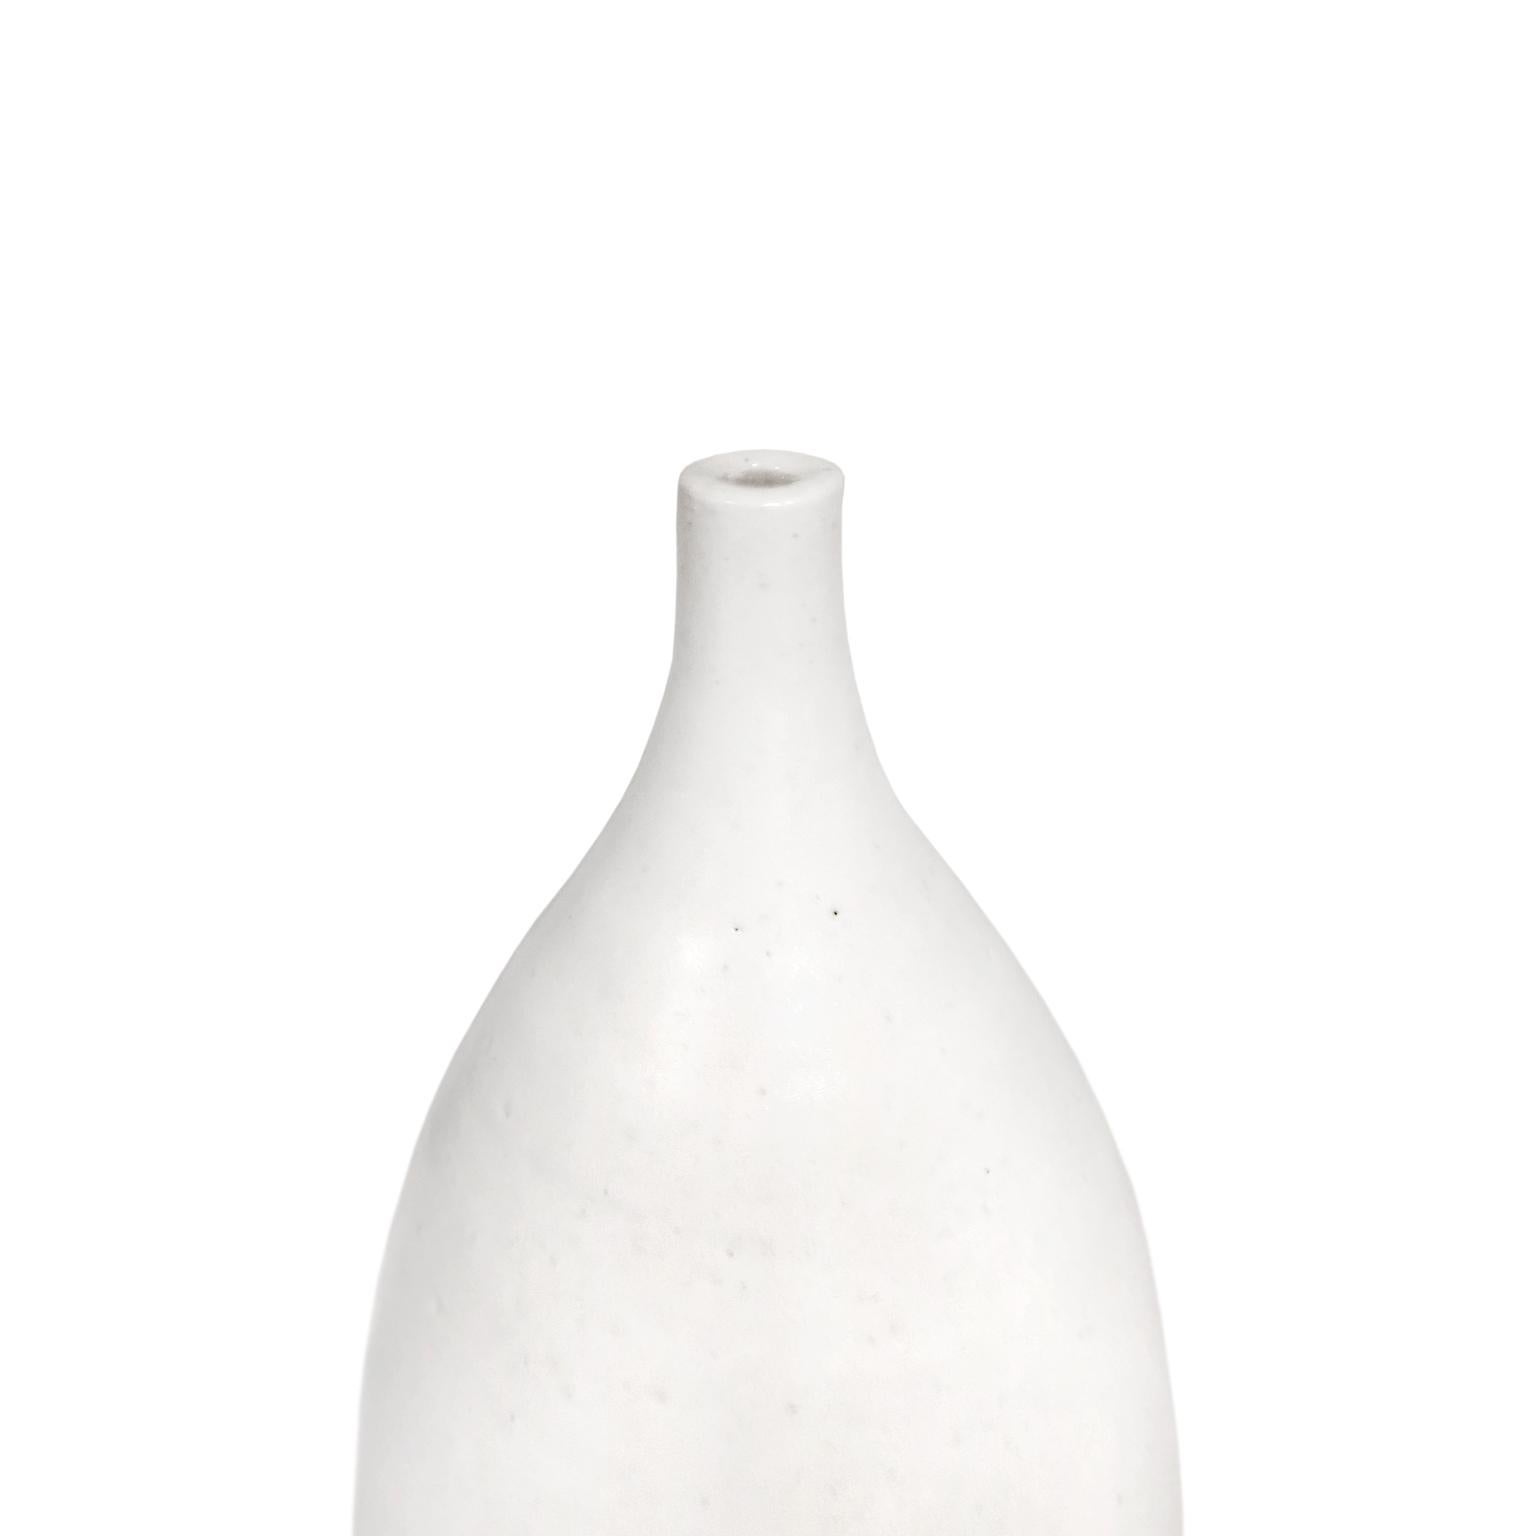 Alabaster glaze ceramic bottle #6 by Sandi Fellman, 2018. 

Veteran photographer Sandi Fellman's ceramic vessels are an exploration of a new medium. The forms, palettes, and sensuality of her photos can be found within each piece. The tactile